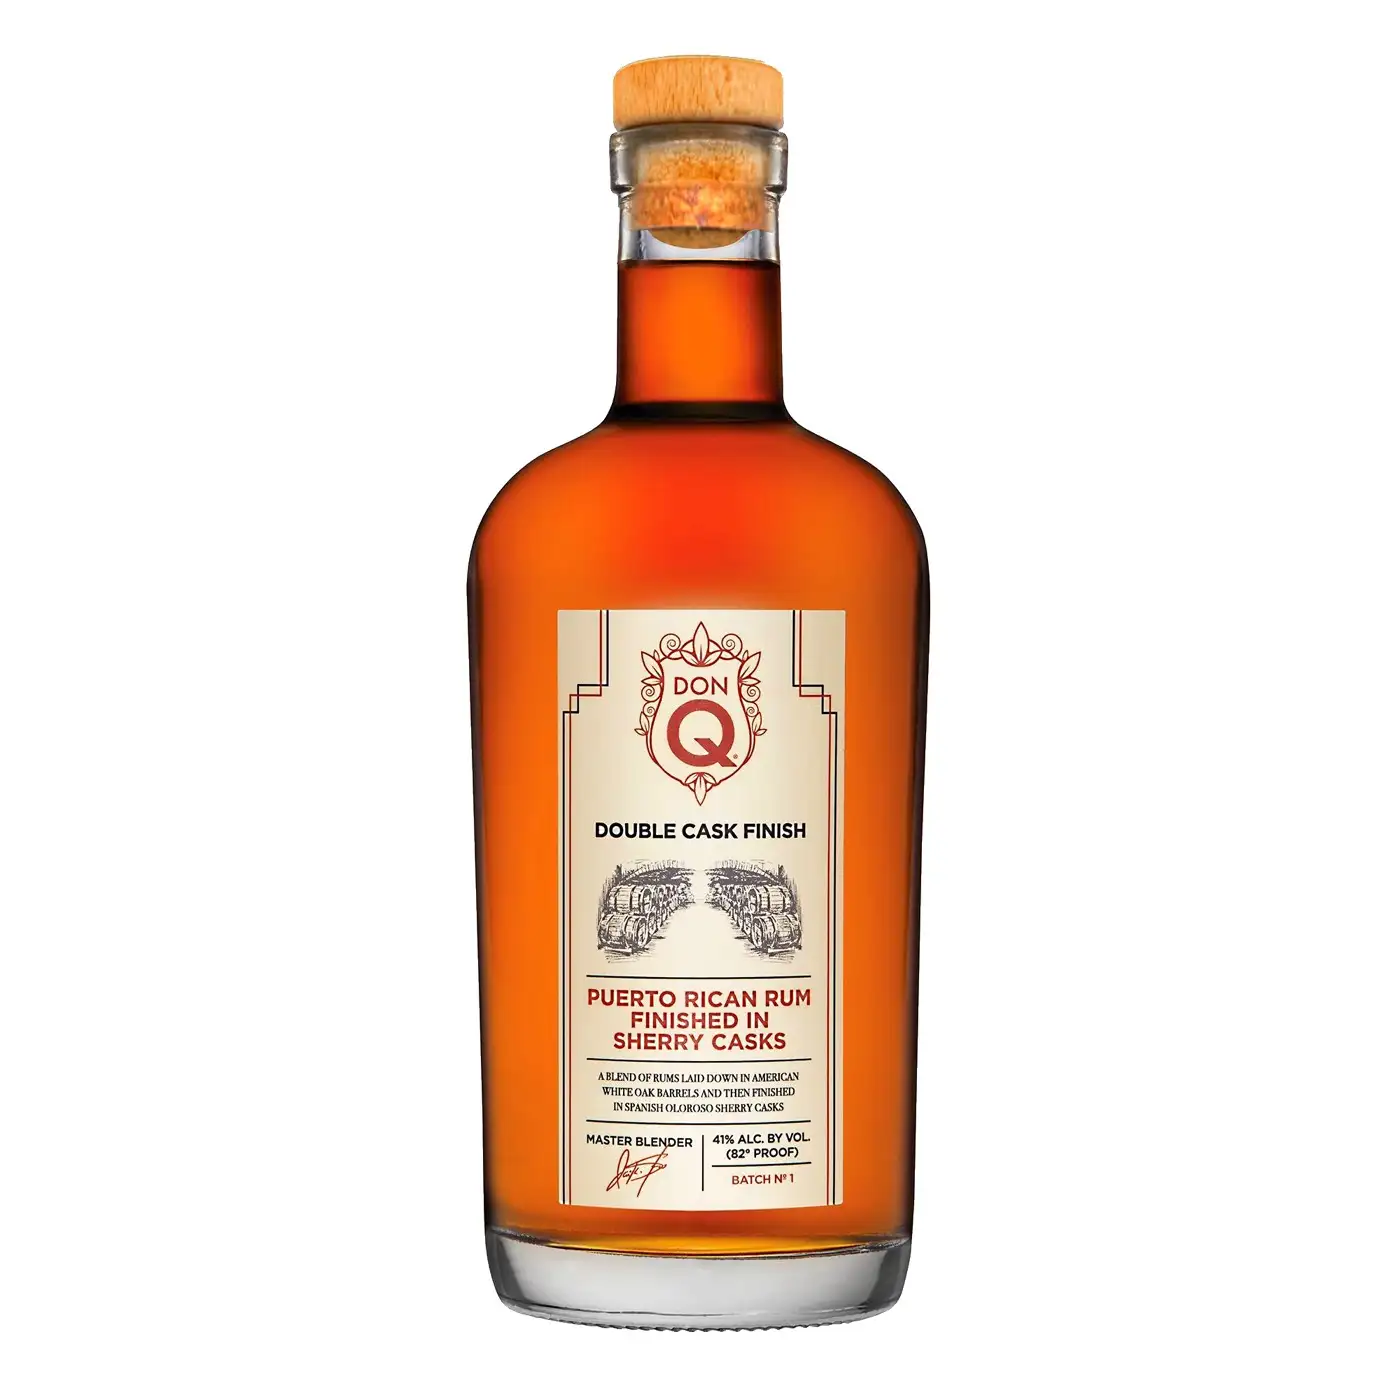 Image of the front of the bottle of the rum Don Q Double Cask Finish - Sherry Cask